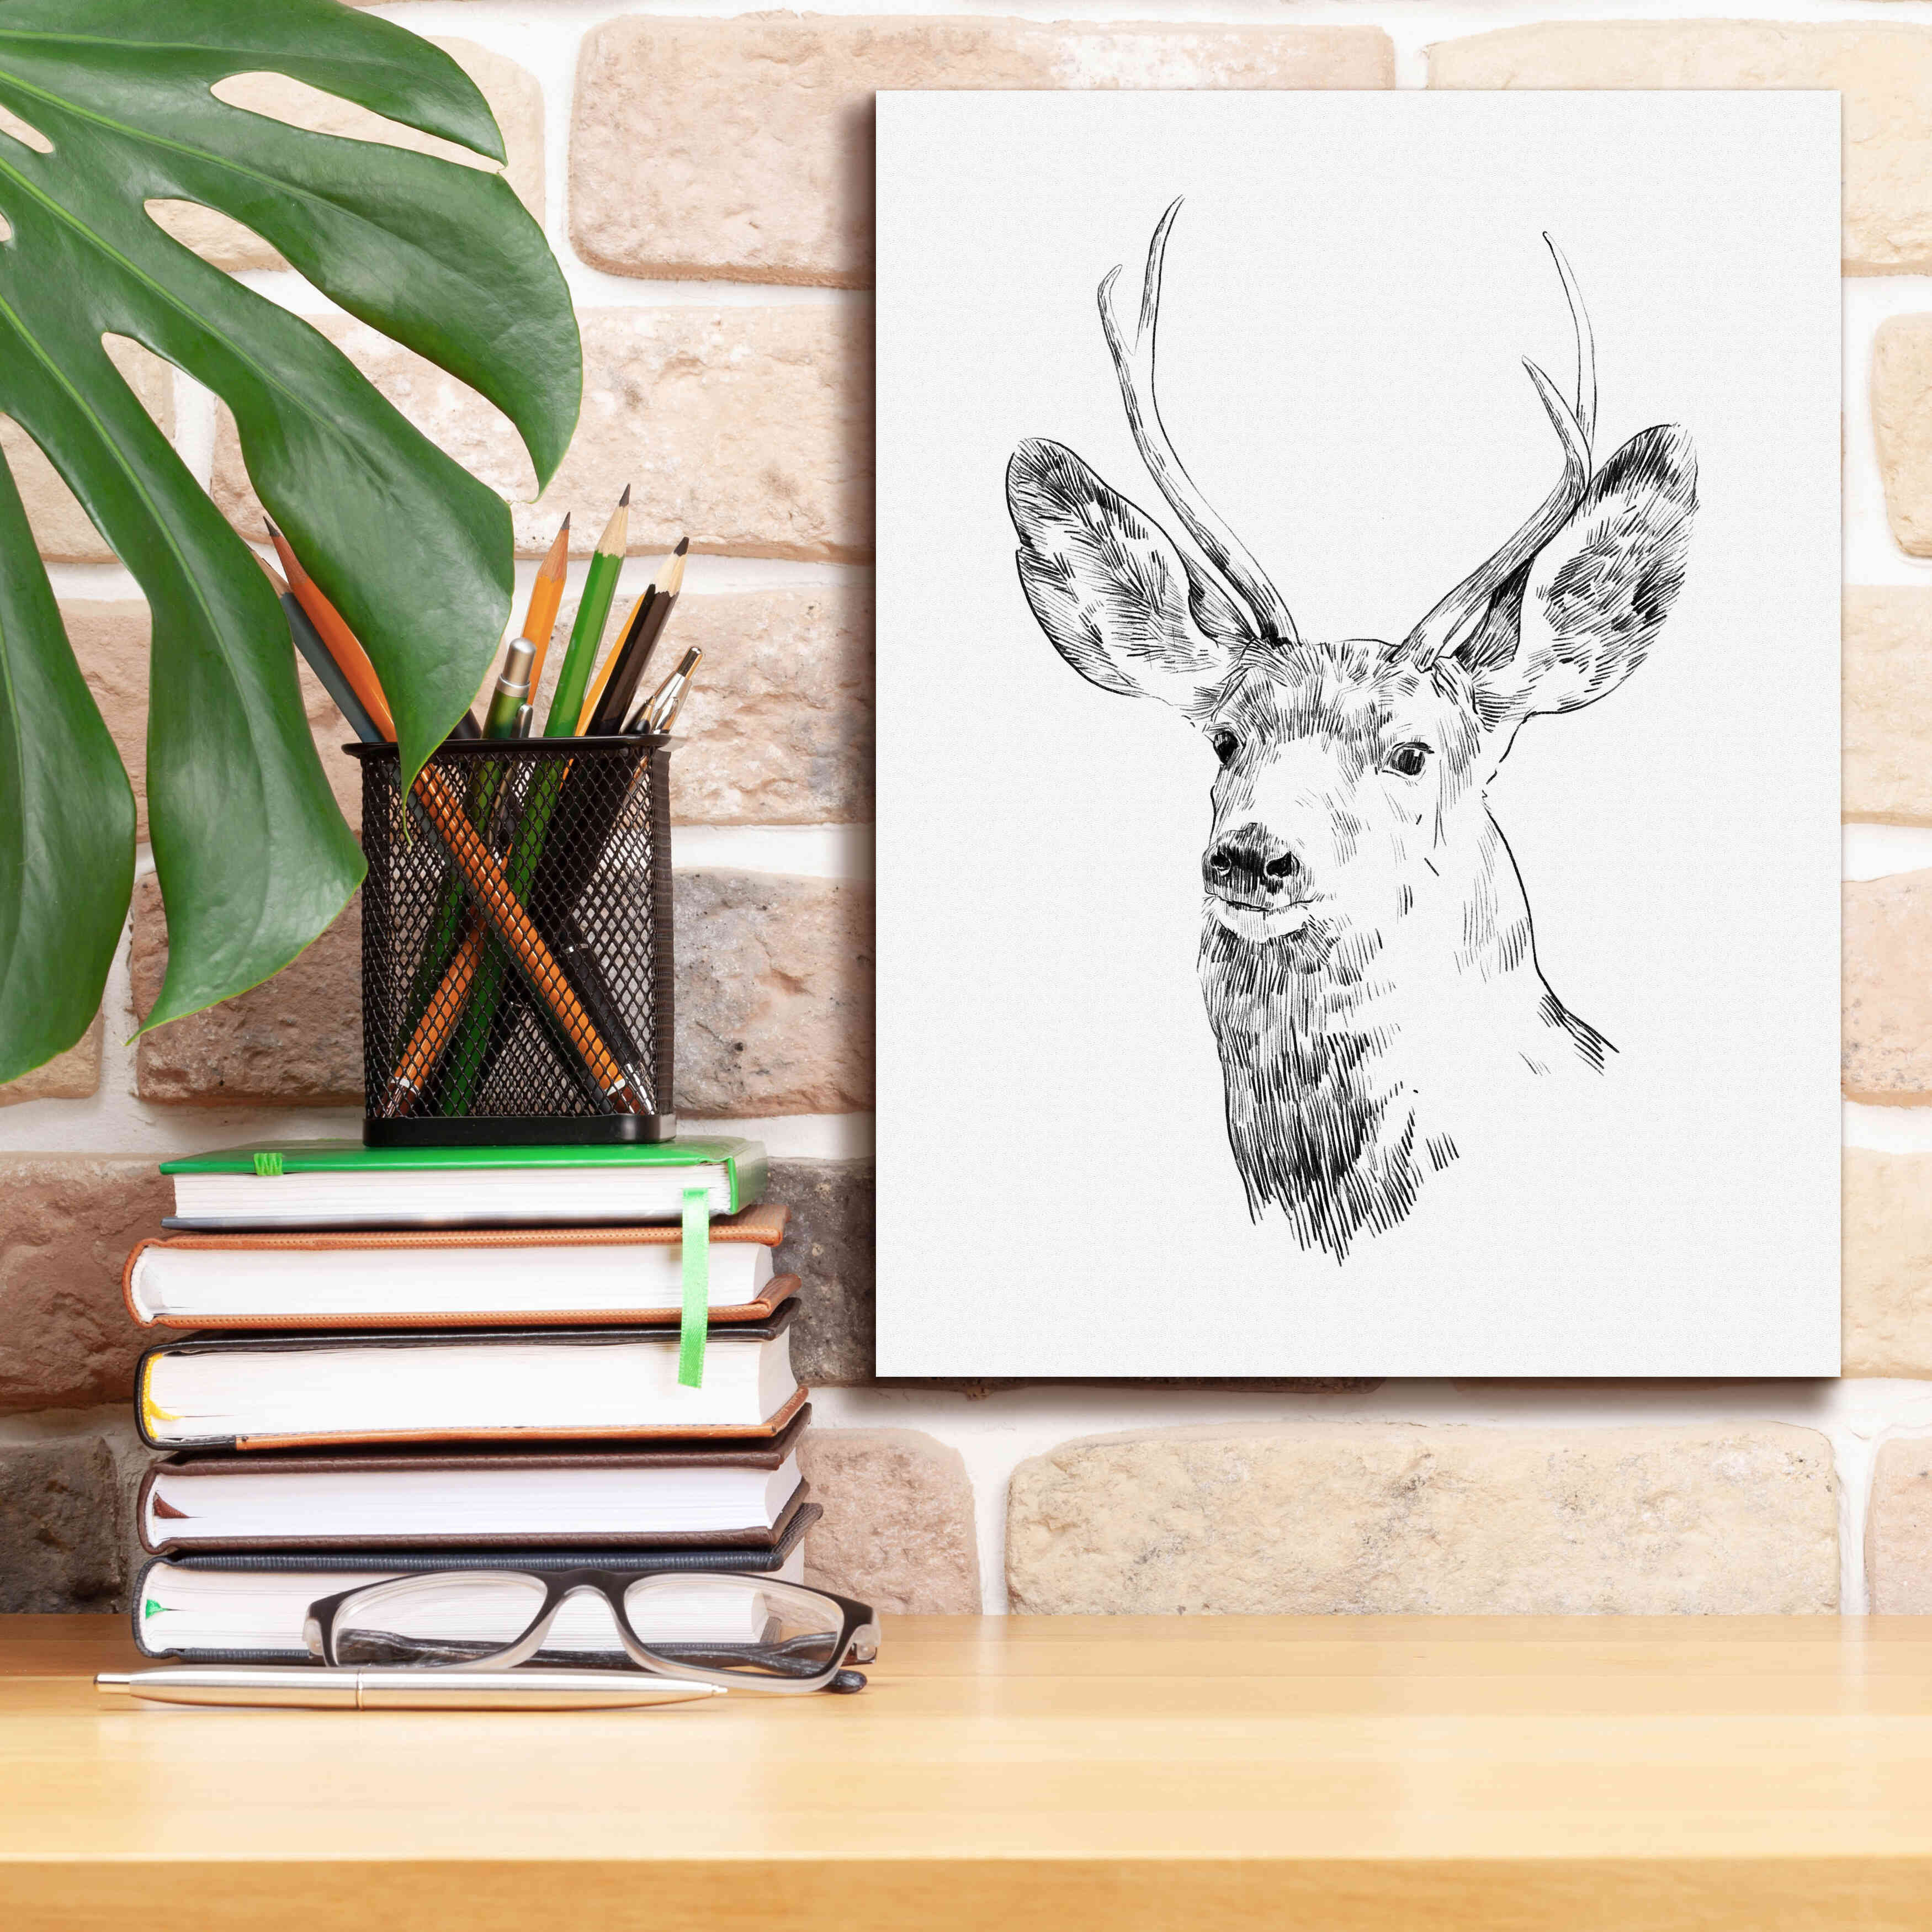 Millwood Pines Epic Graffiti 'Young Buck Sketch IV' By Emma Scarv Young Buck  Sketch IV On Canvas by Emma Scarvey Print